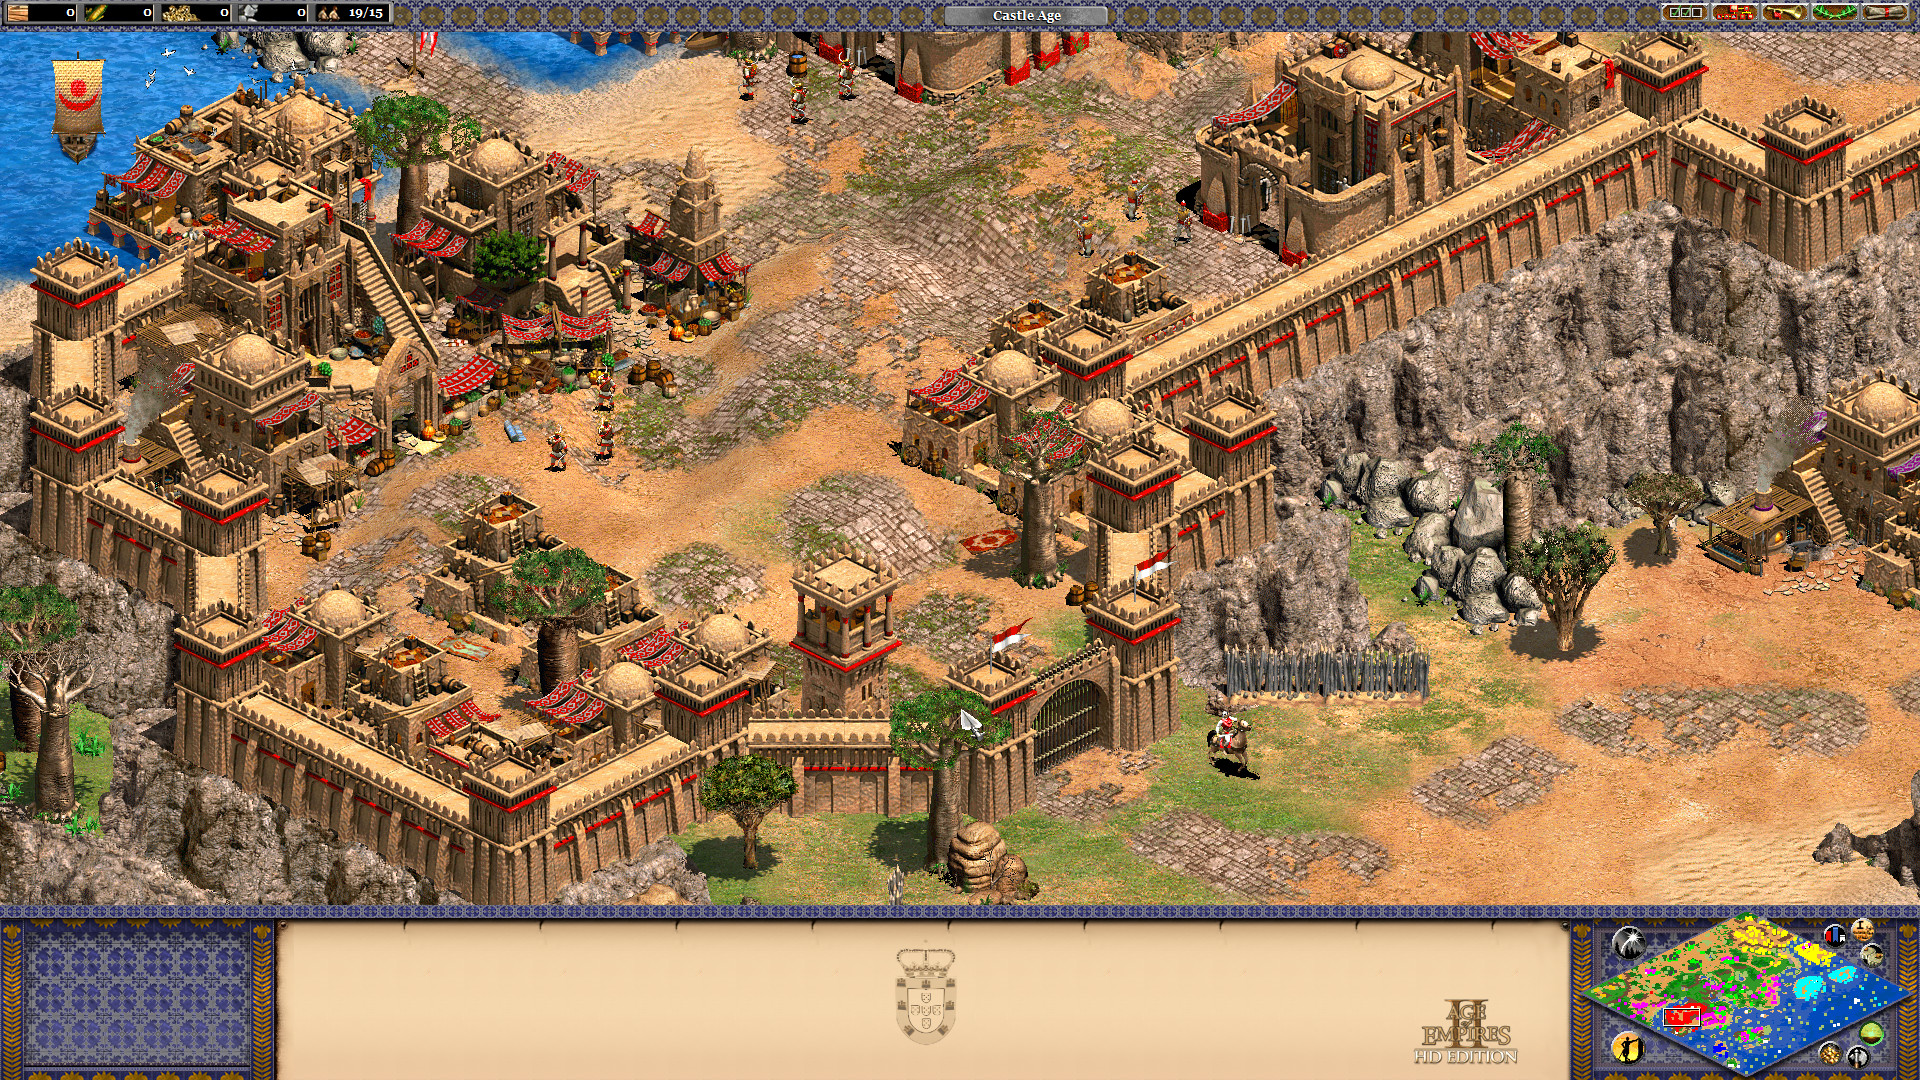 age of empires ii hd completo